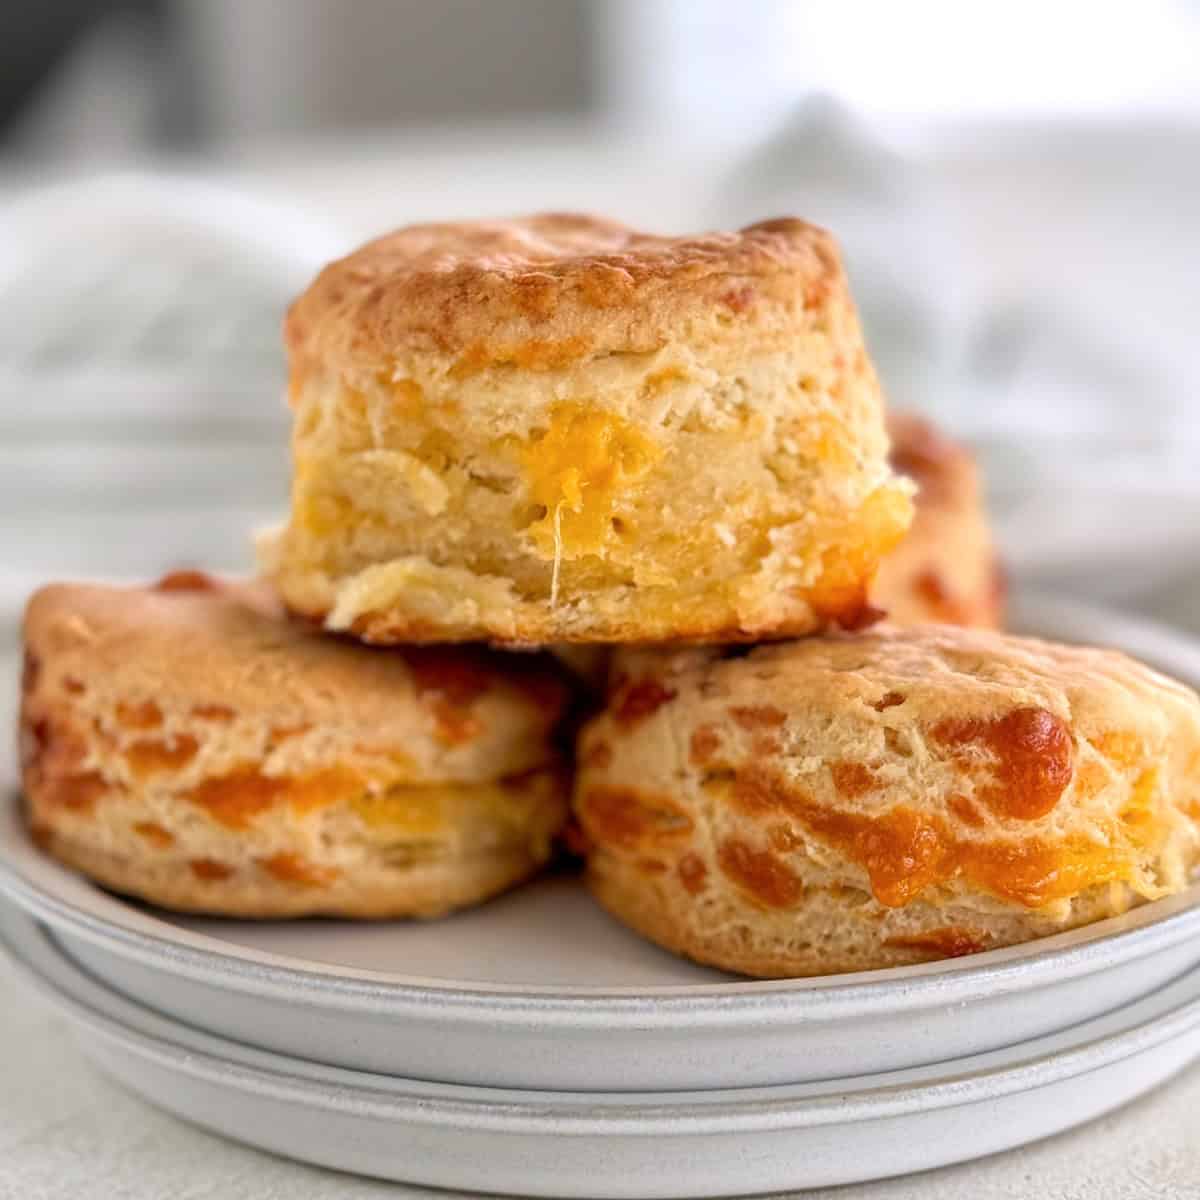 Cheddar biscuits